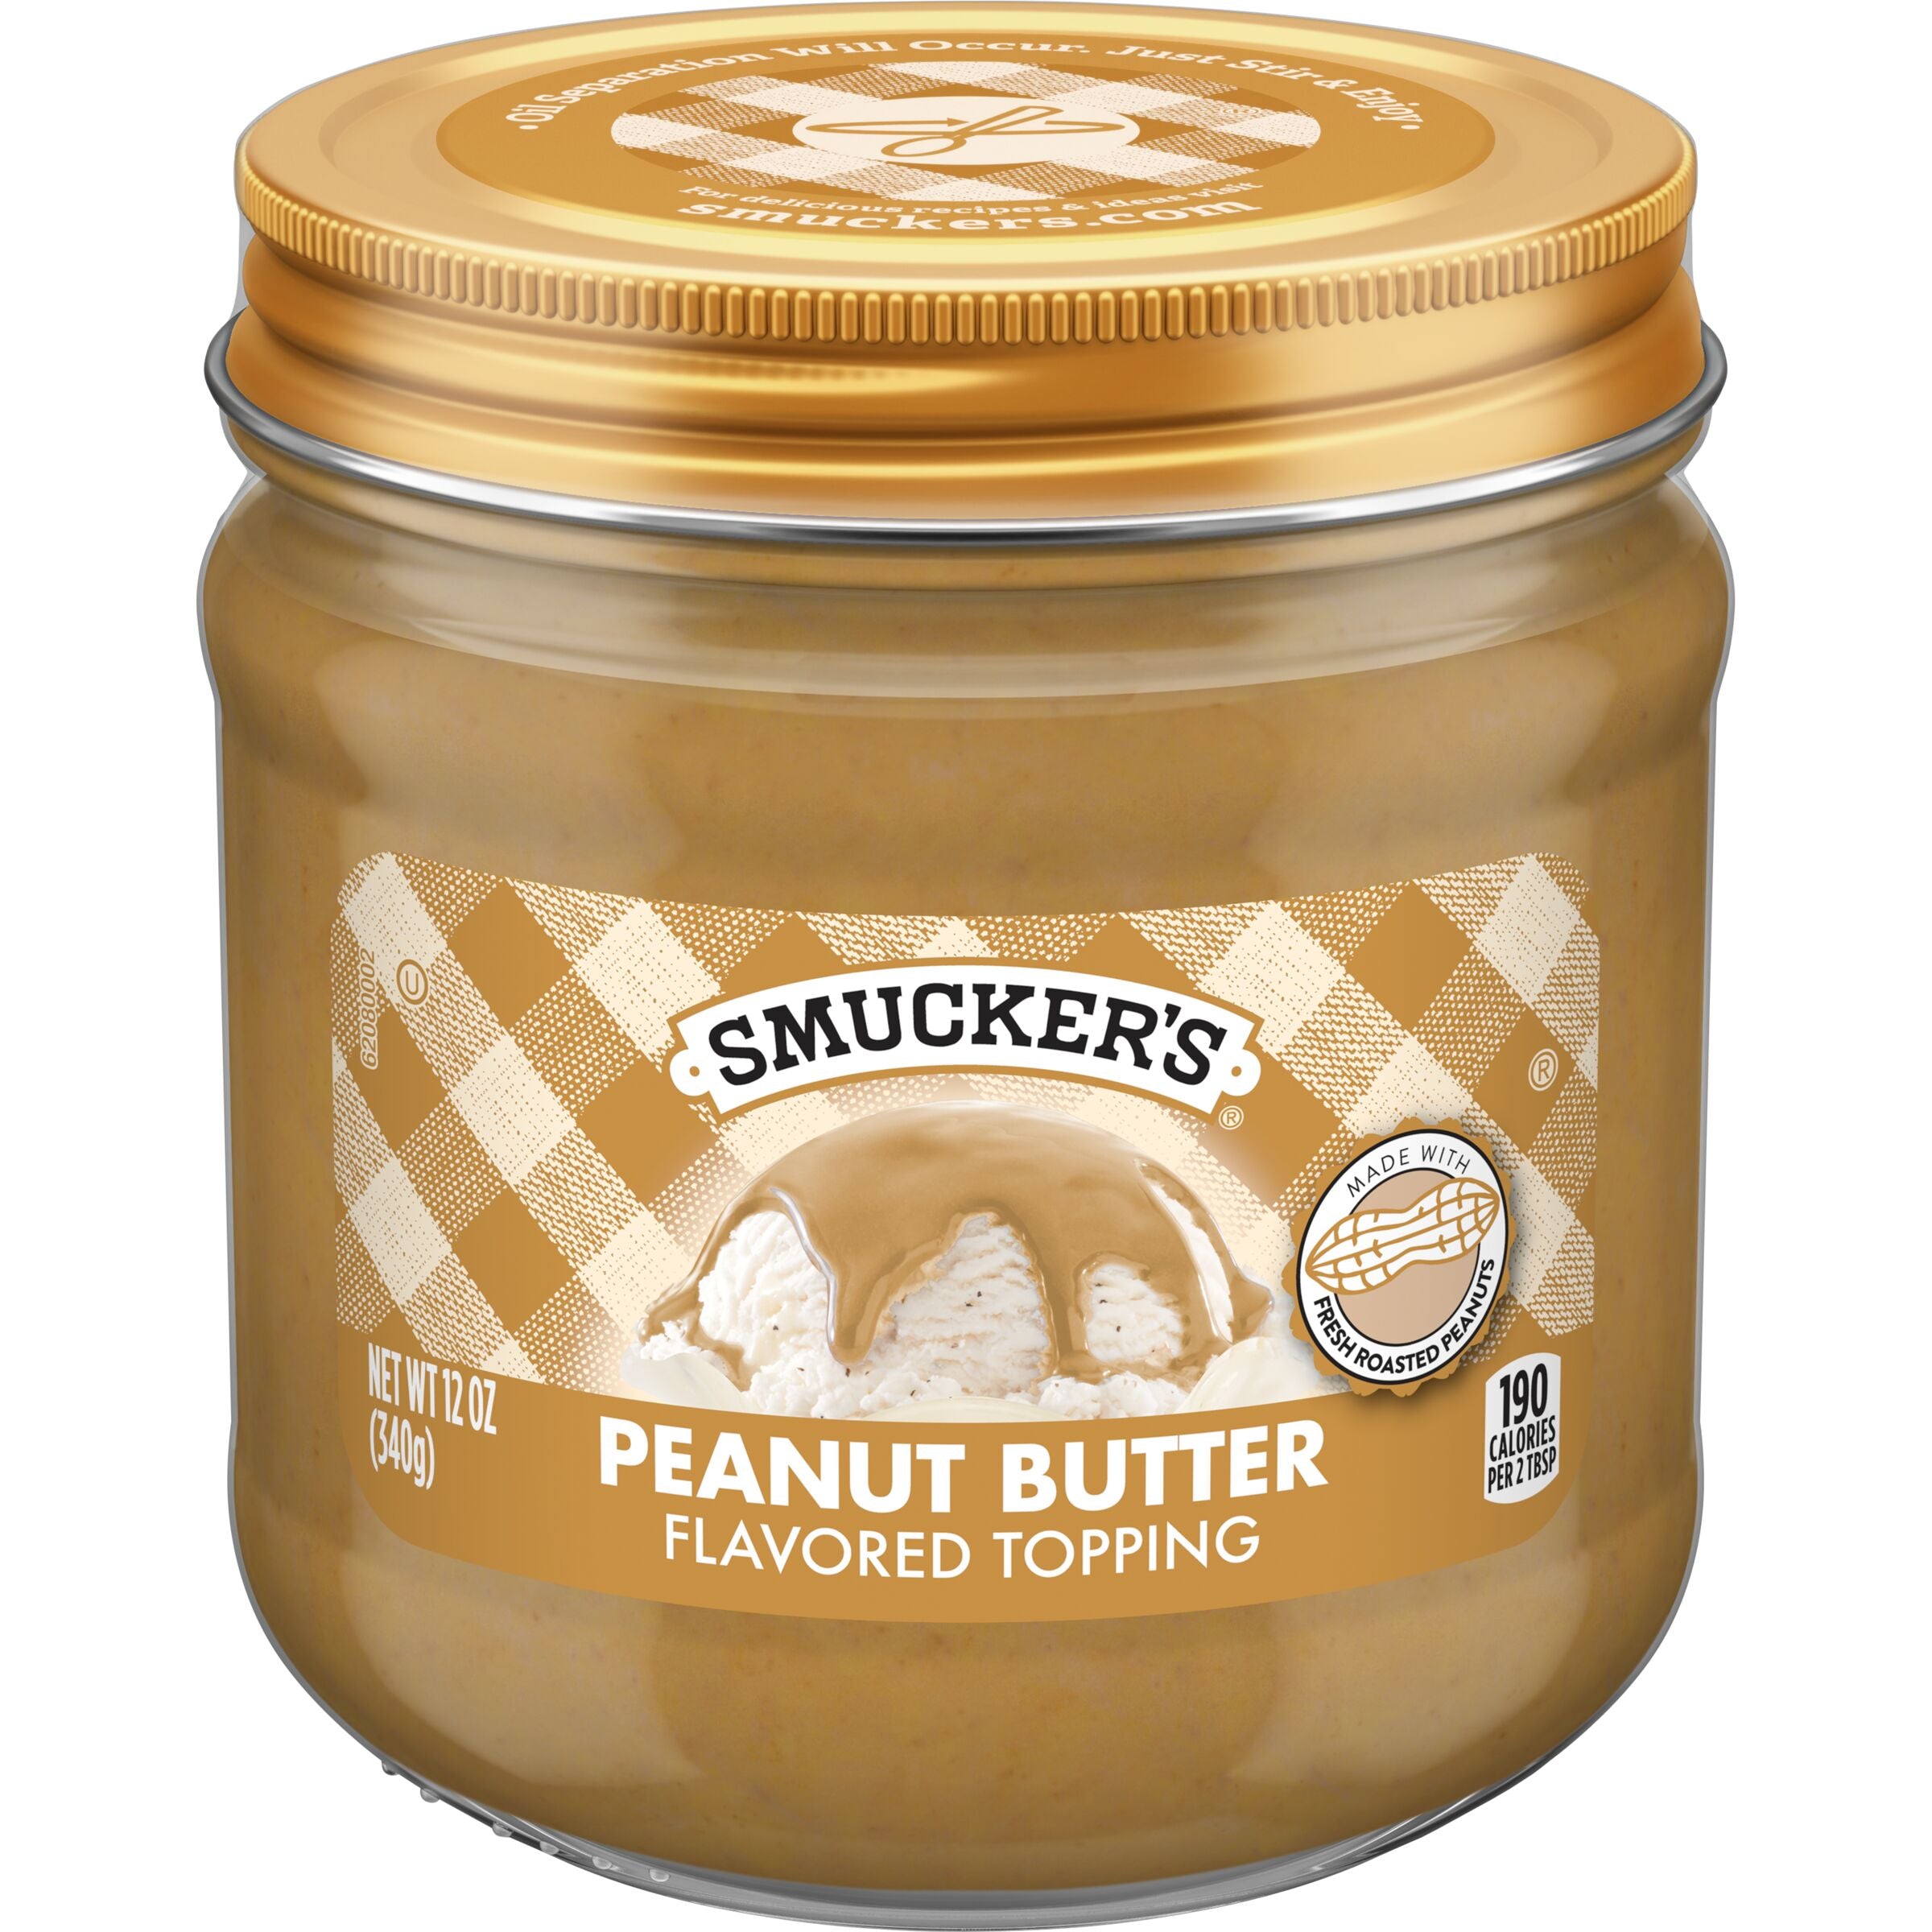 Smucker's Peanut Butter Flavored Ice Cream Topping, 12 oz